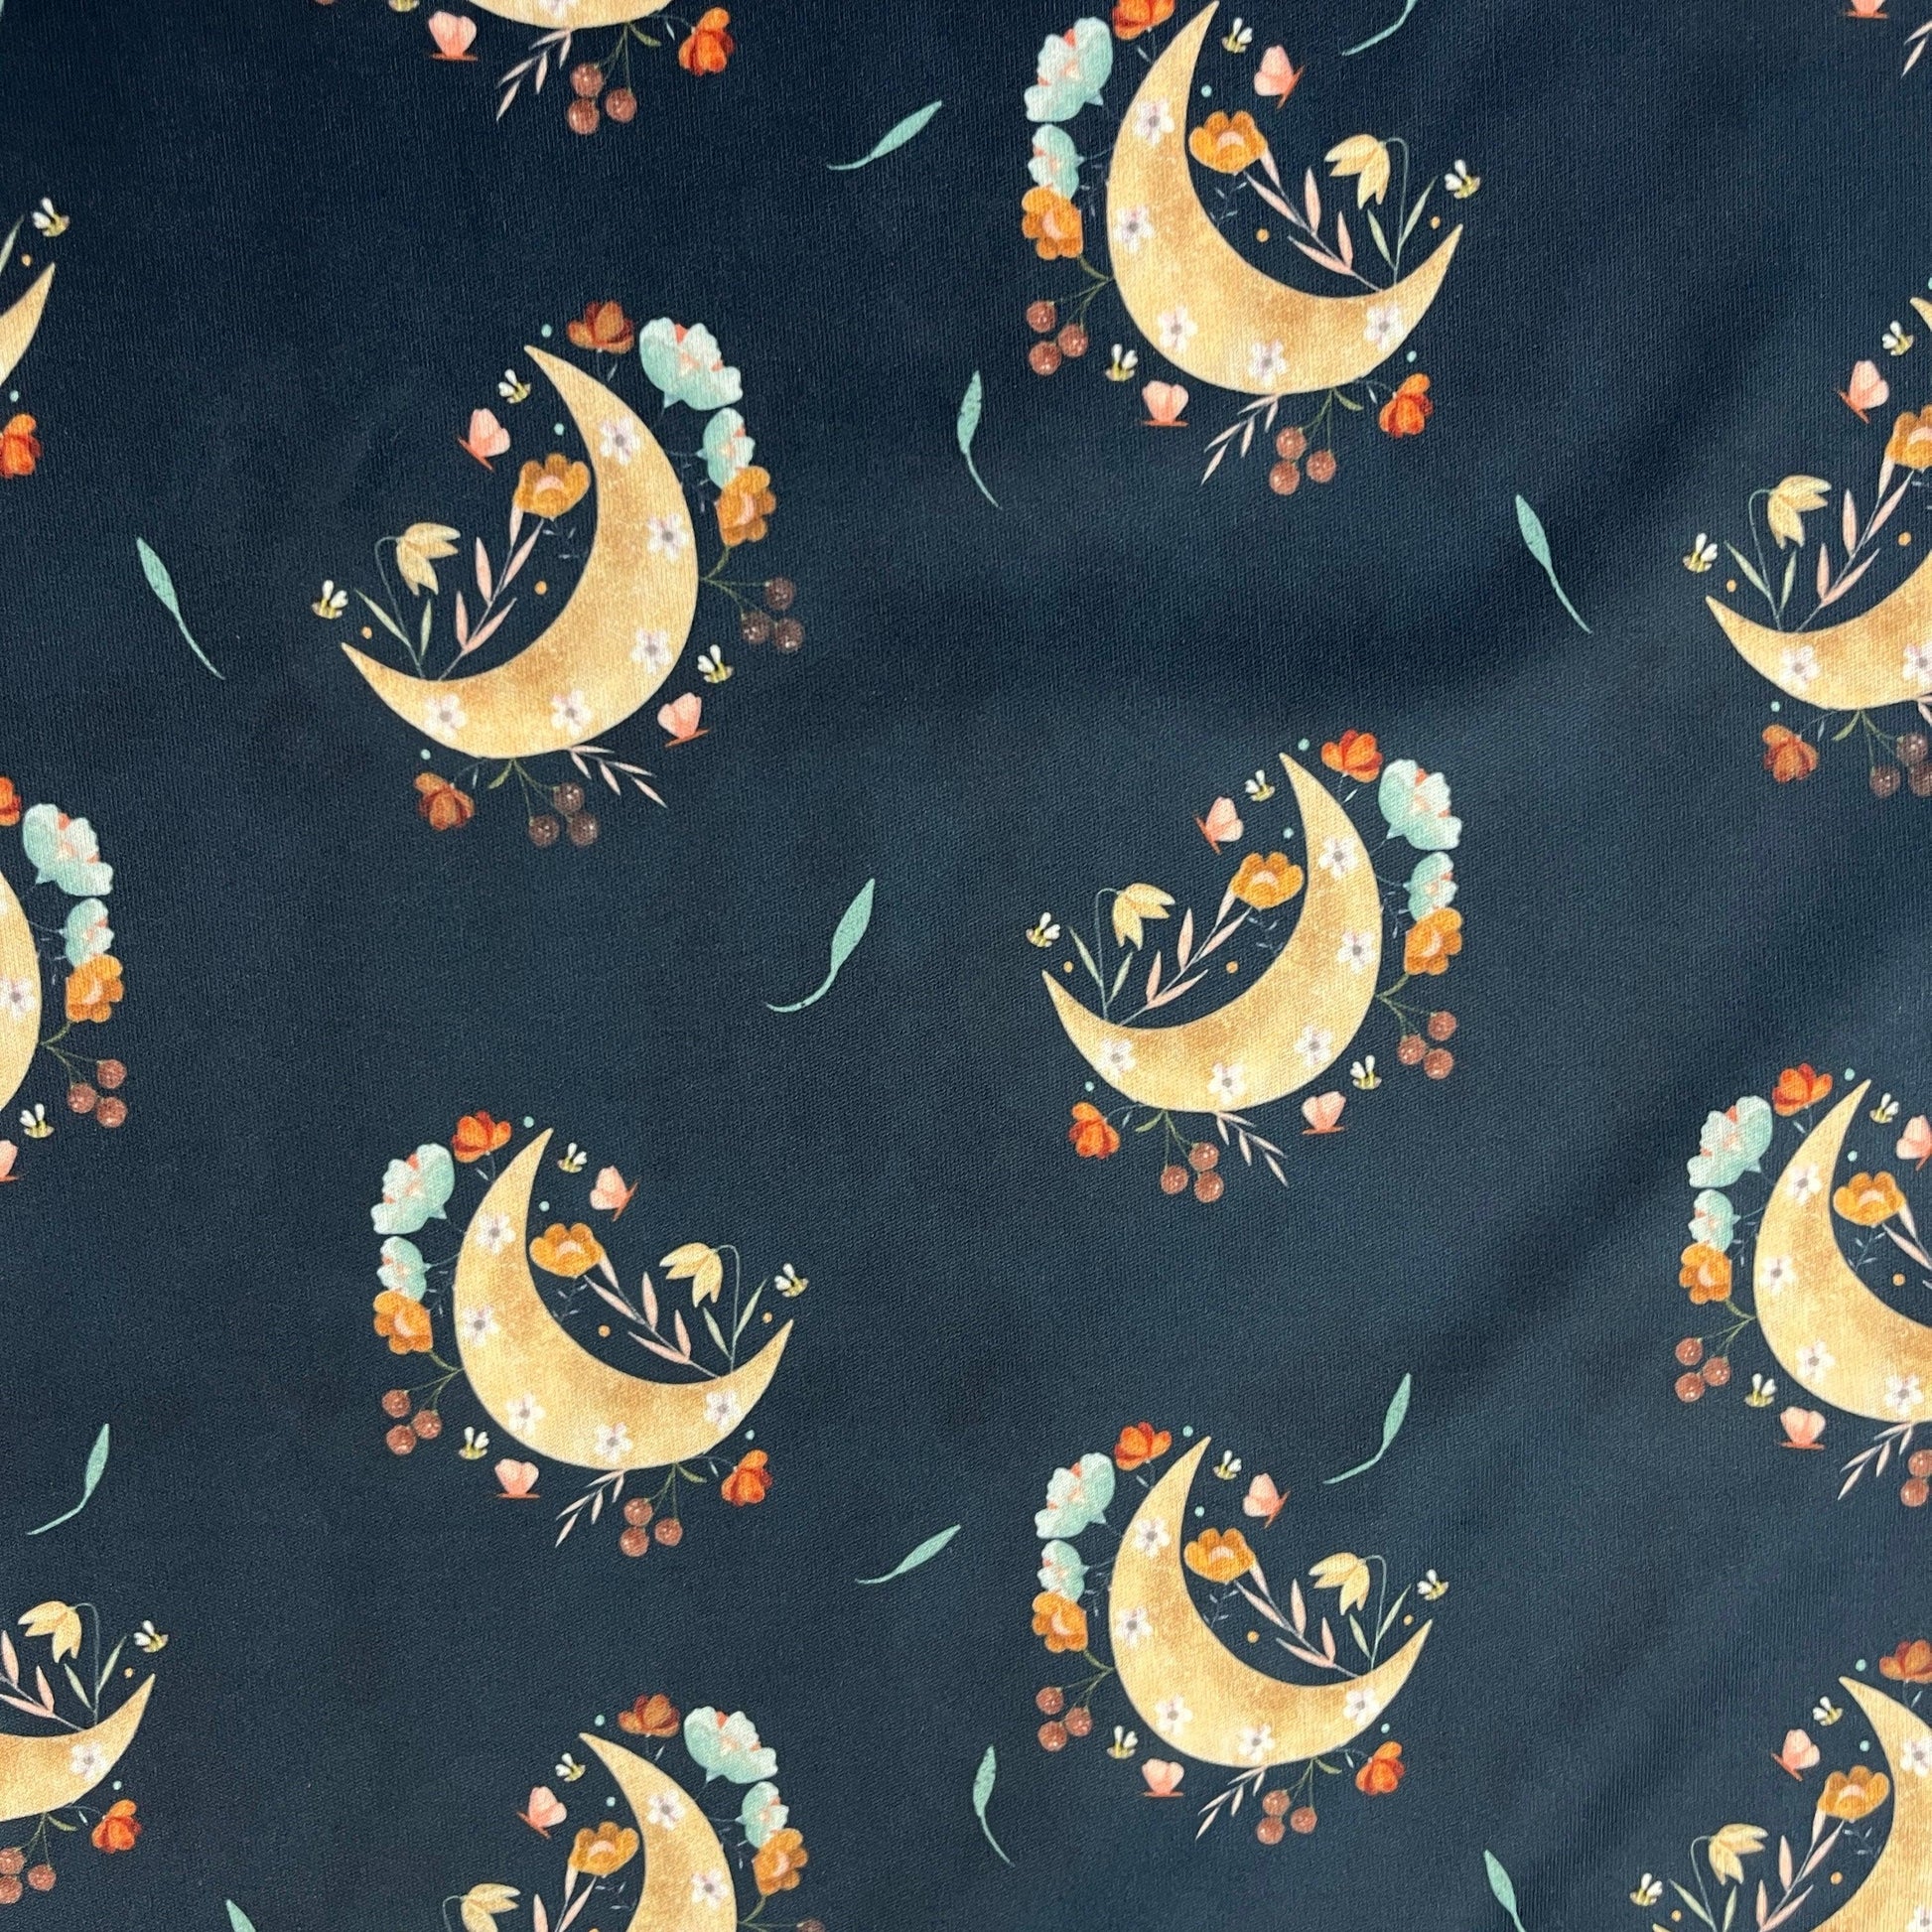 Moon Sprigs on Navy 1 mil PUL Fabric - Made in the USA - Nature's Fabrics